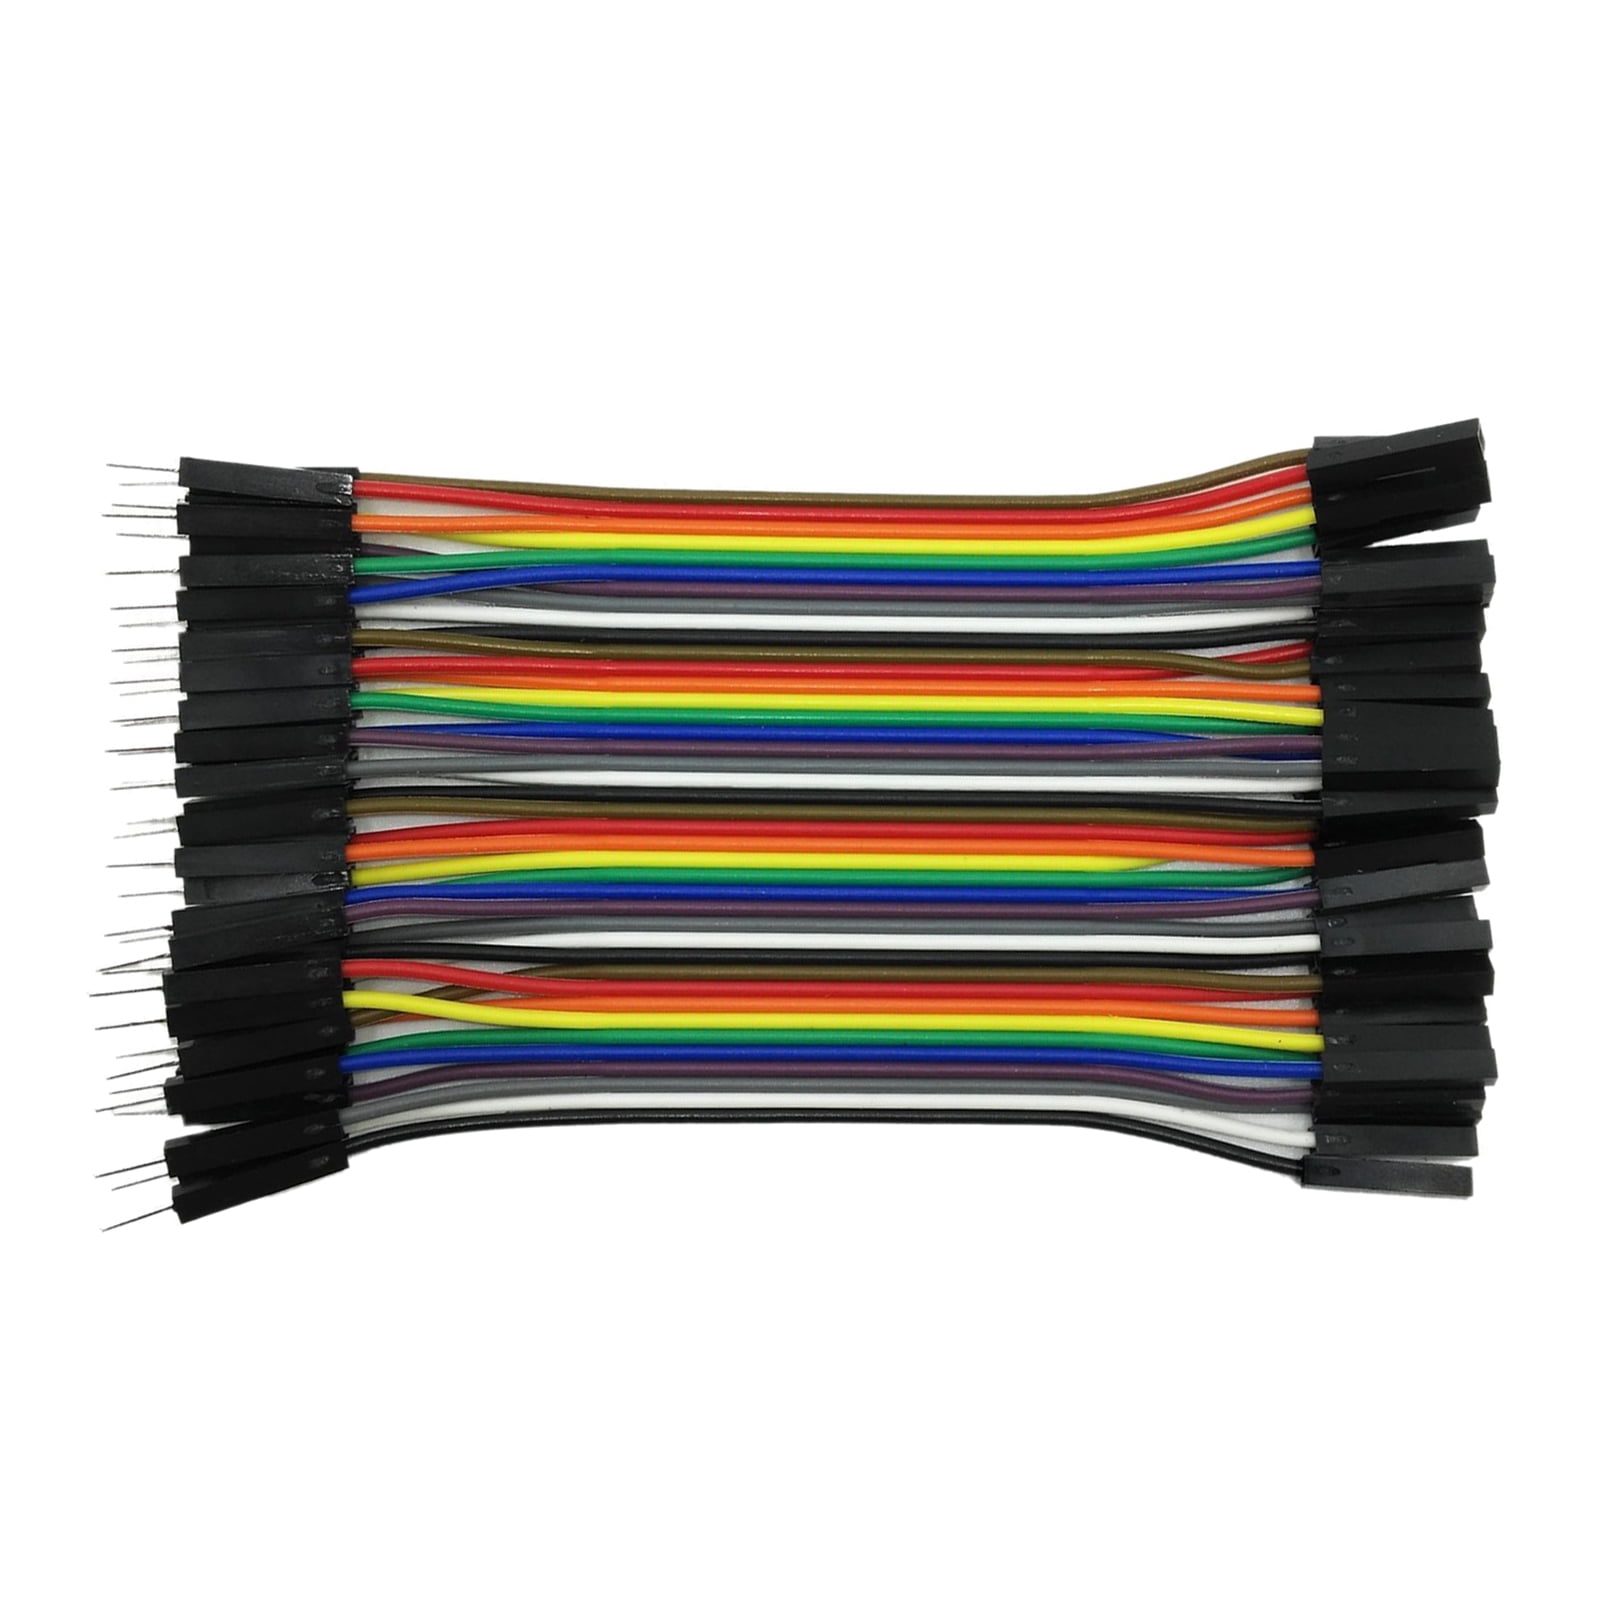 40pcs 10cm Jumper Wire Cable For Arduino Breadboard Prototyping Male t.OU 